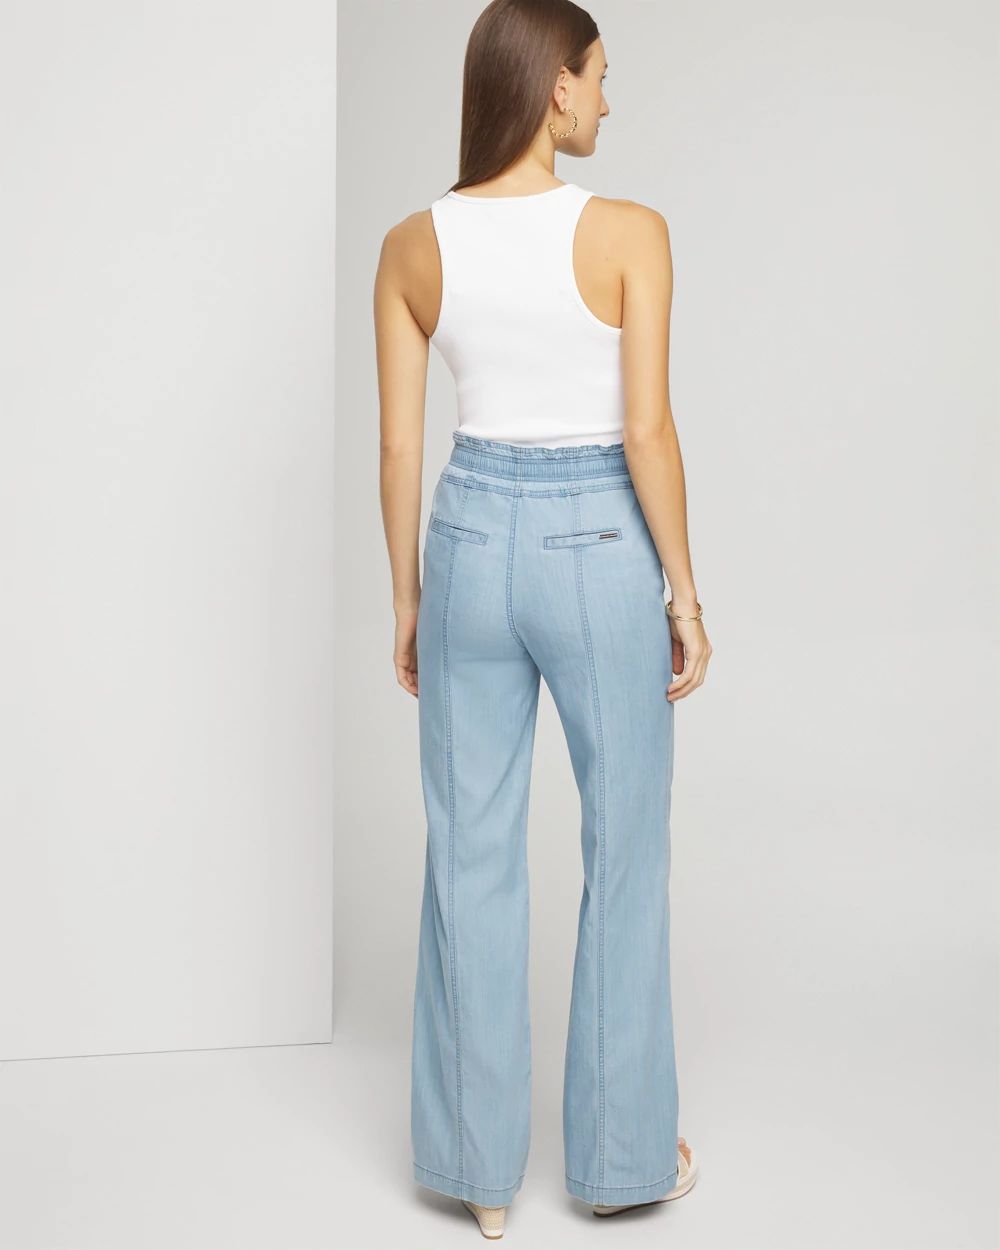 Petite Extra High-Rise Wide-Leg Jeans click to view larger image.